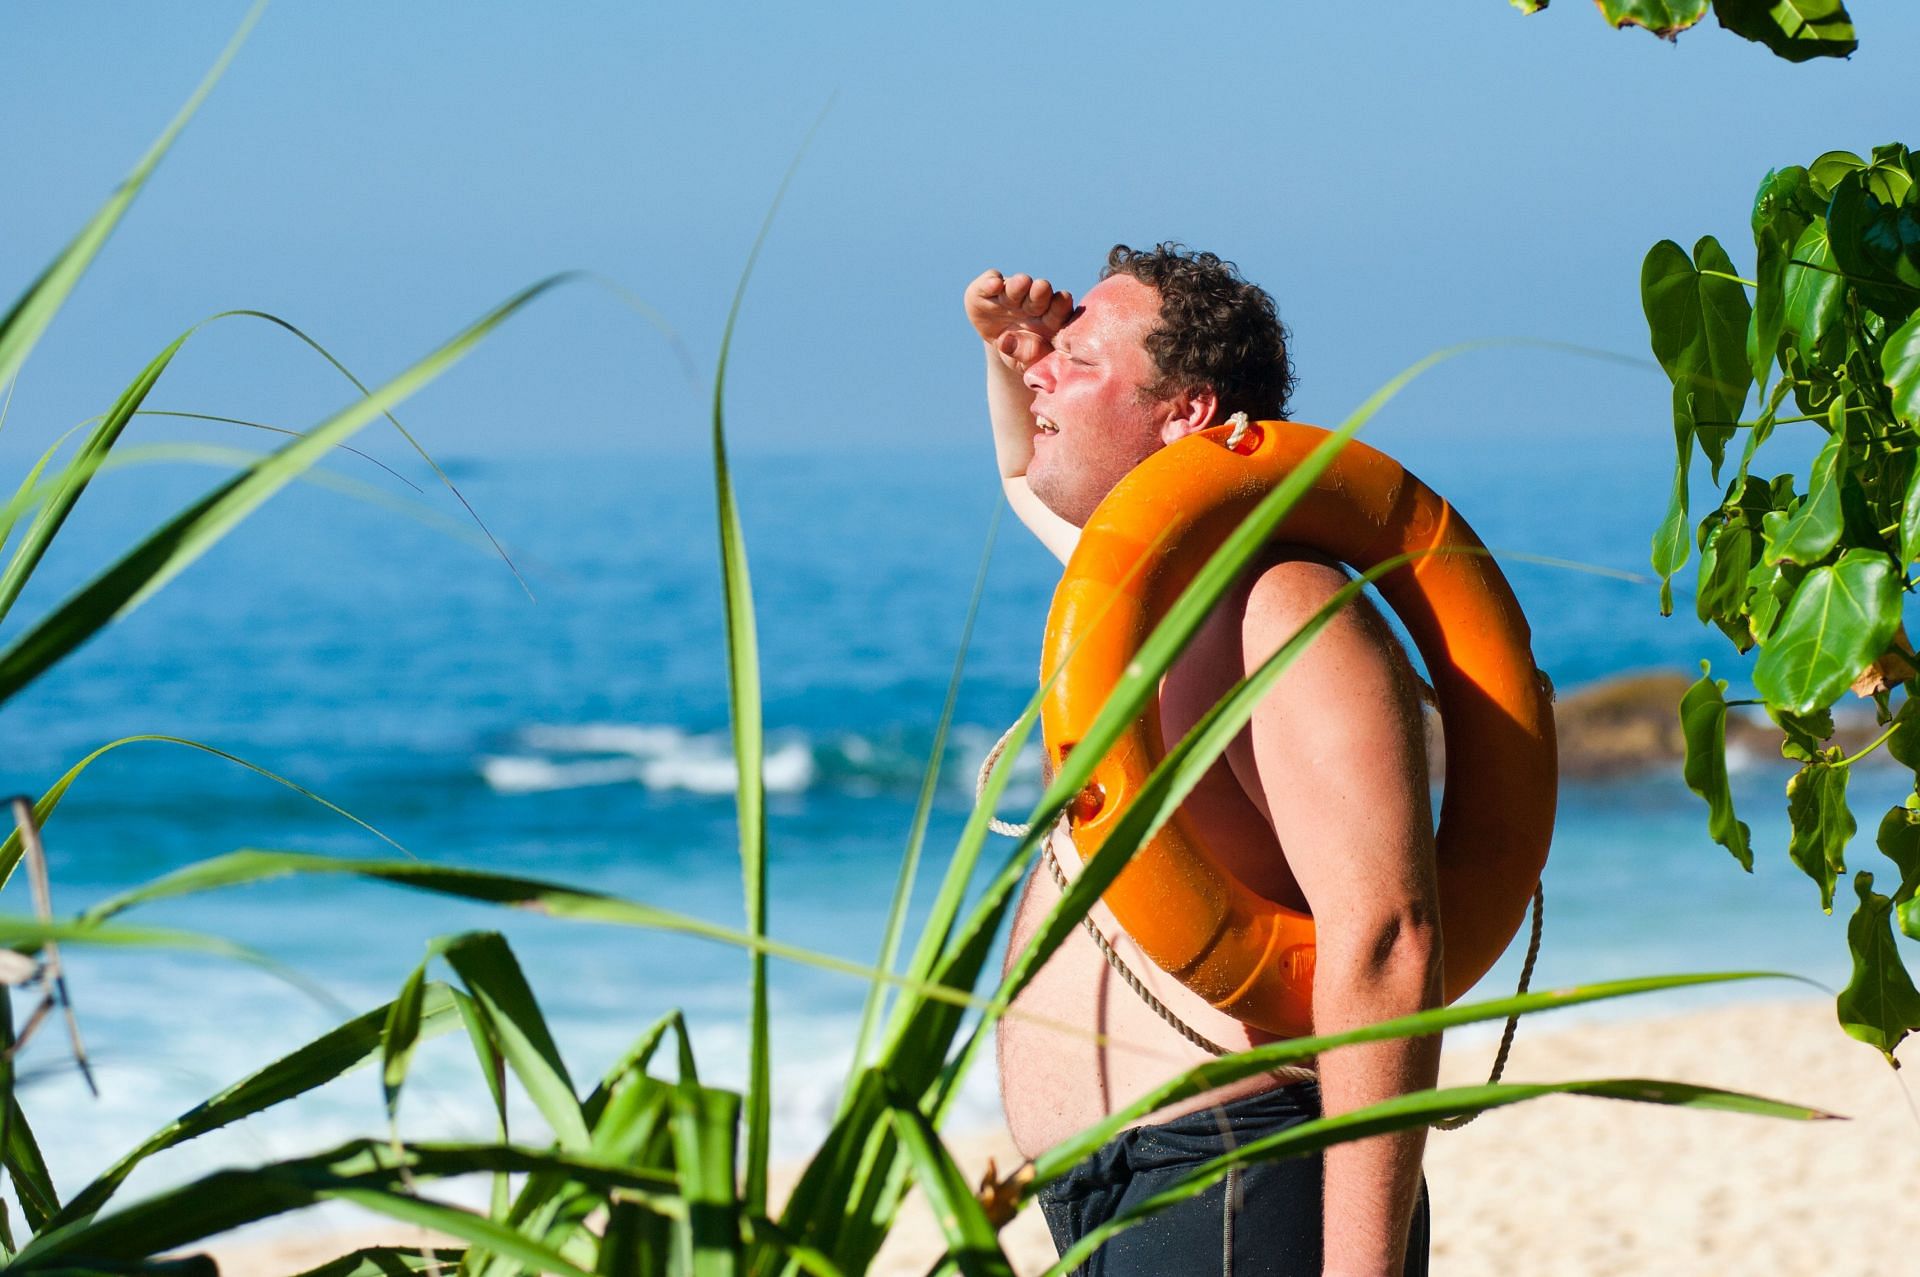 Disadvantages of not using sunscreen (image sourced via Pexels / Photo by Oleksandr)